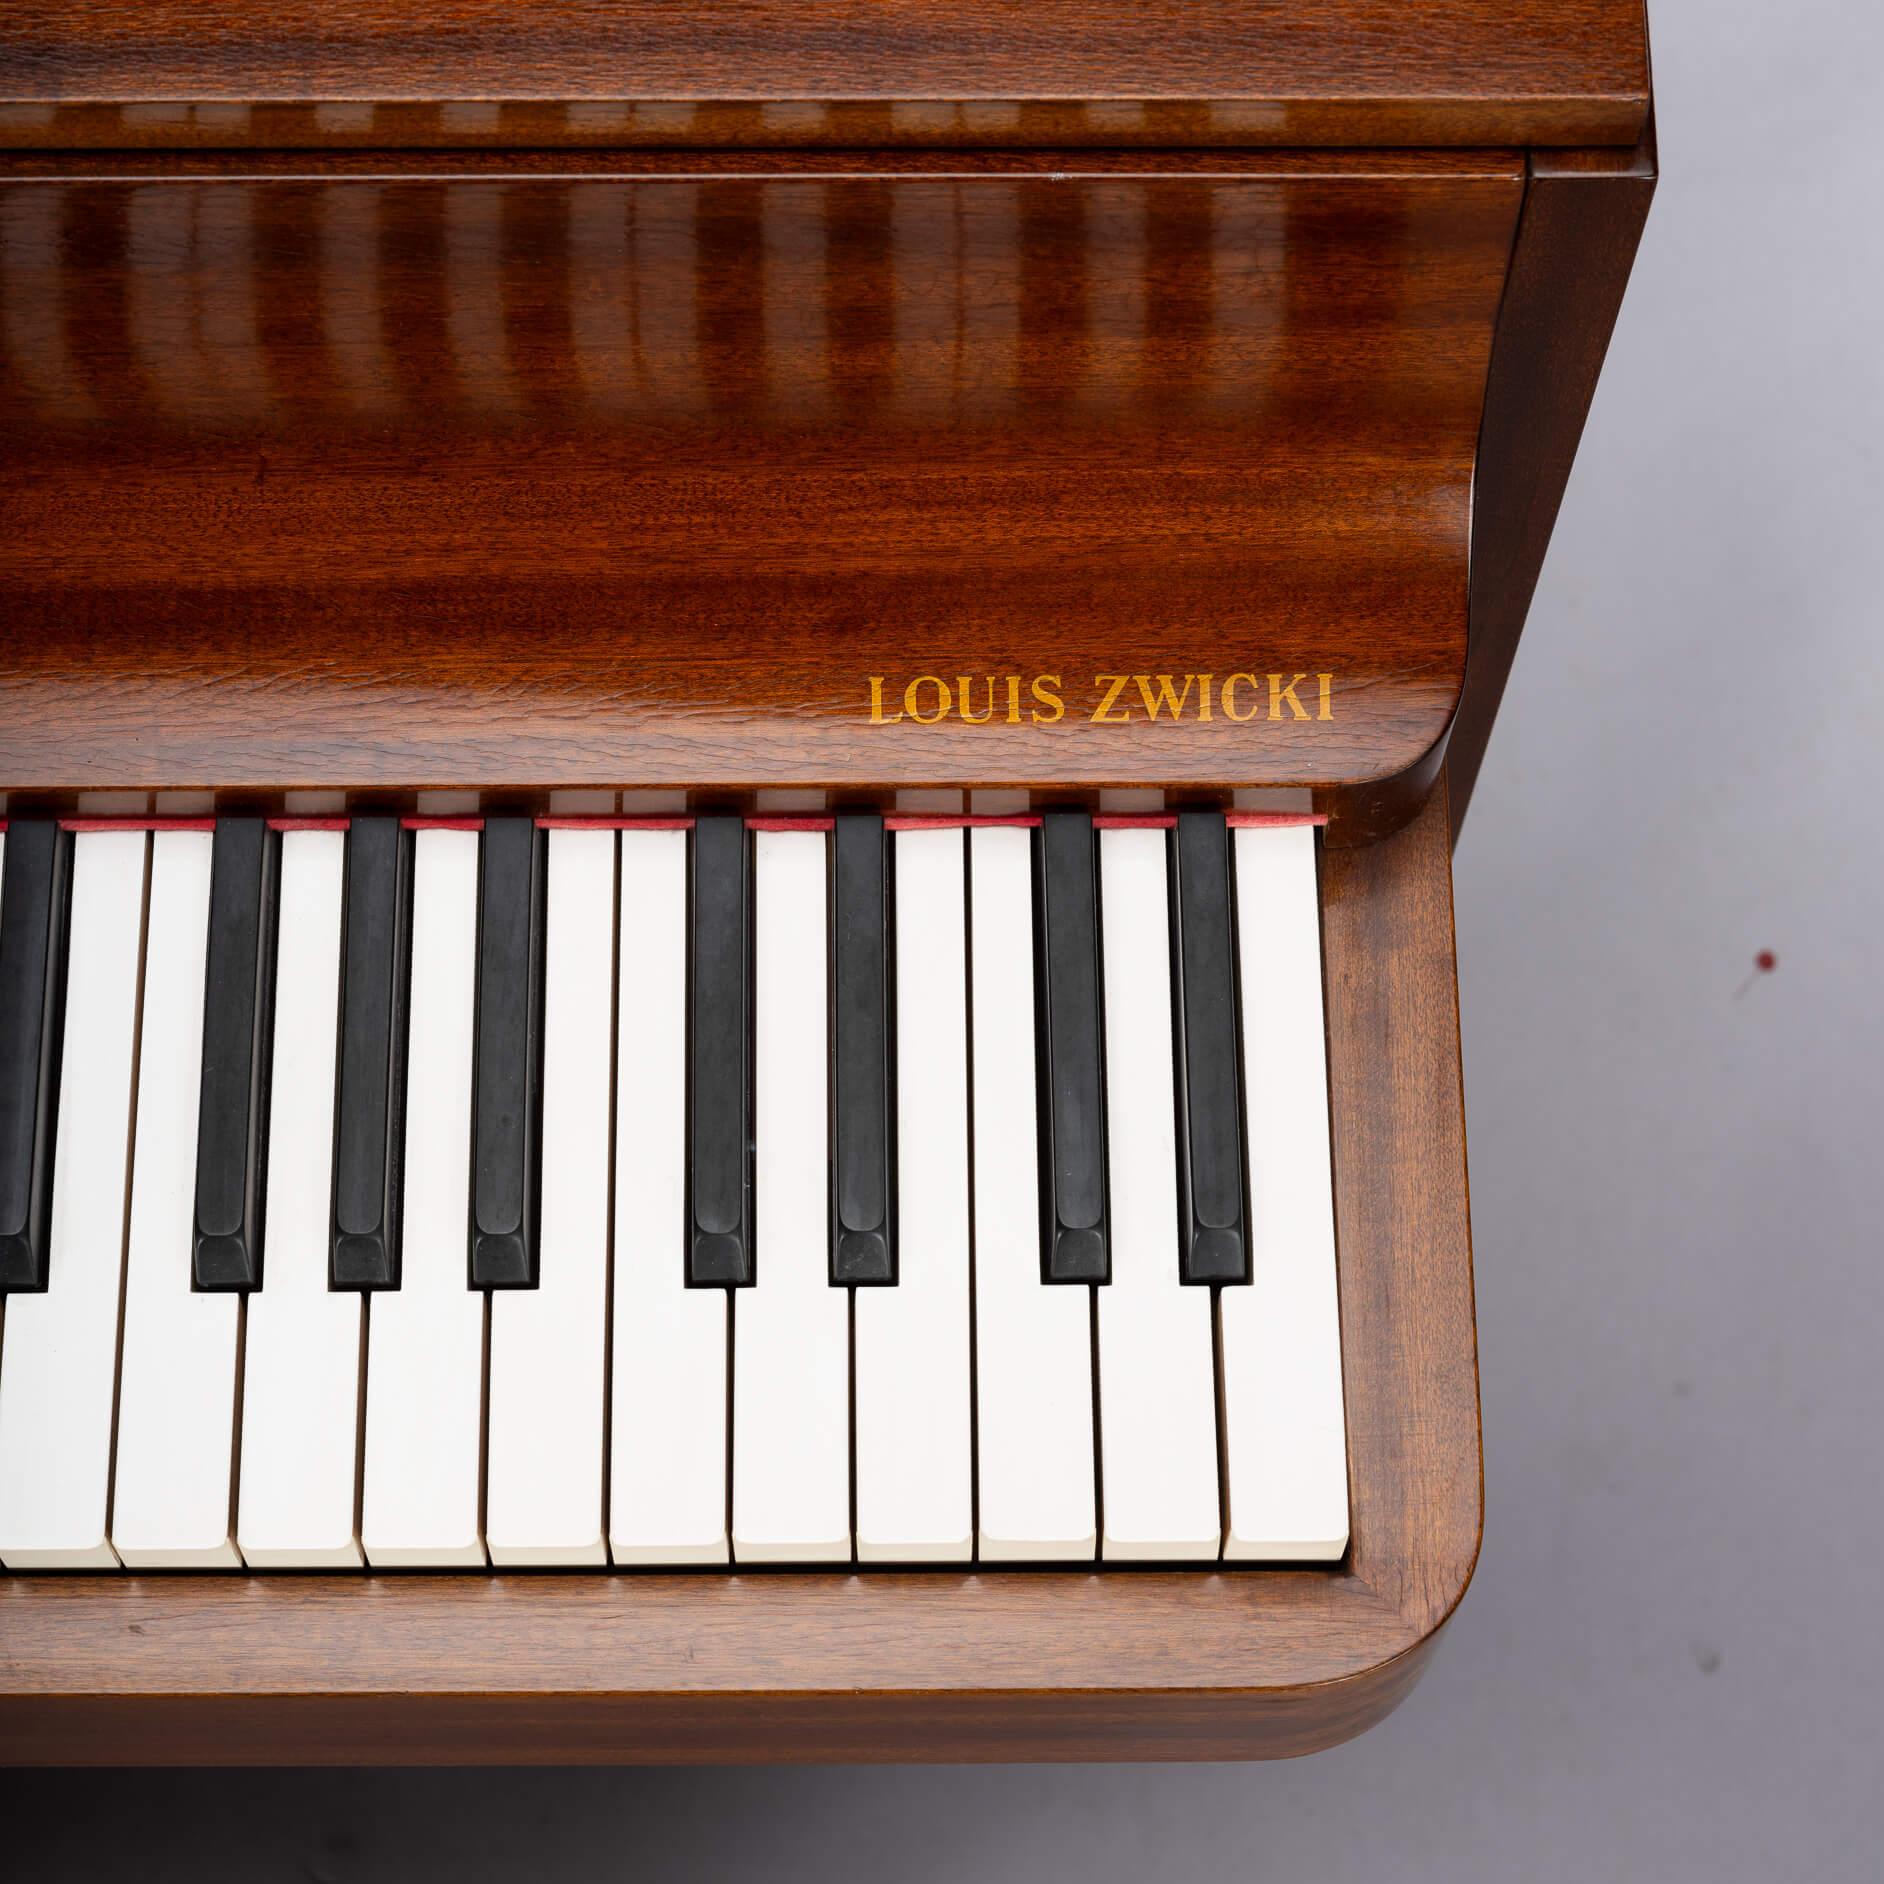 Danish Design Midcentury Pianette by Louis Zwicki in Mahogany, 1950s For Sale 10